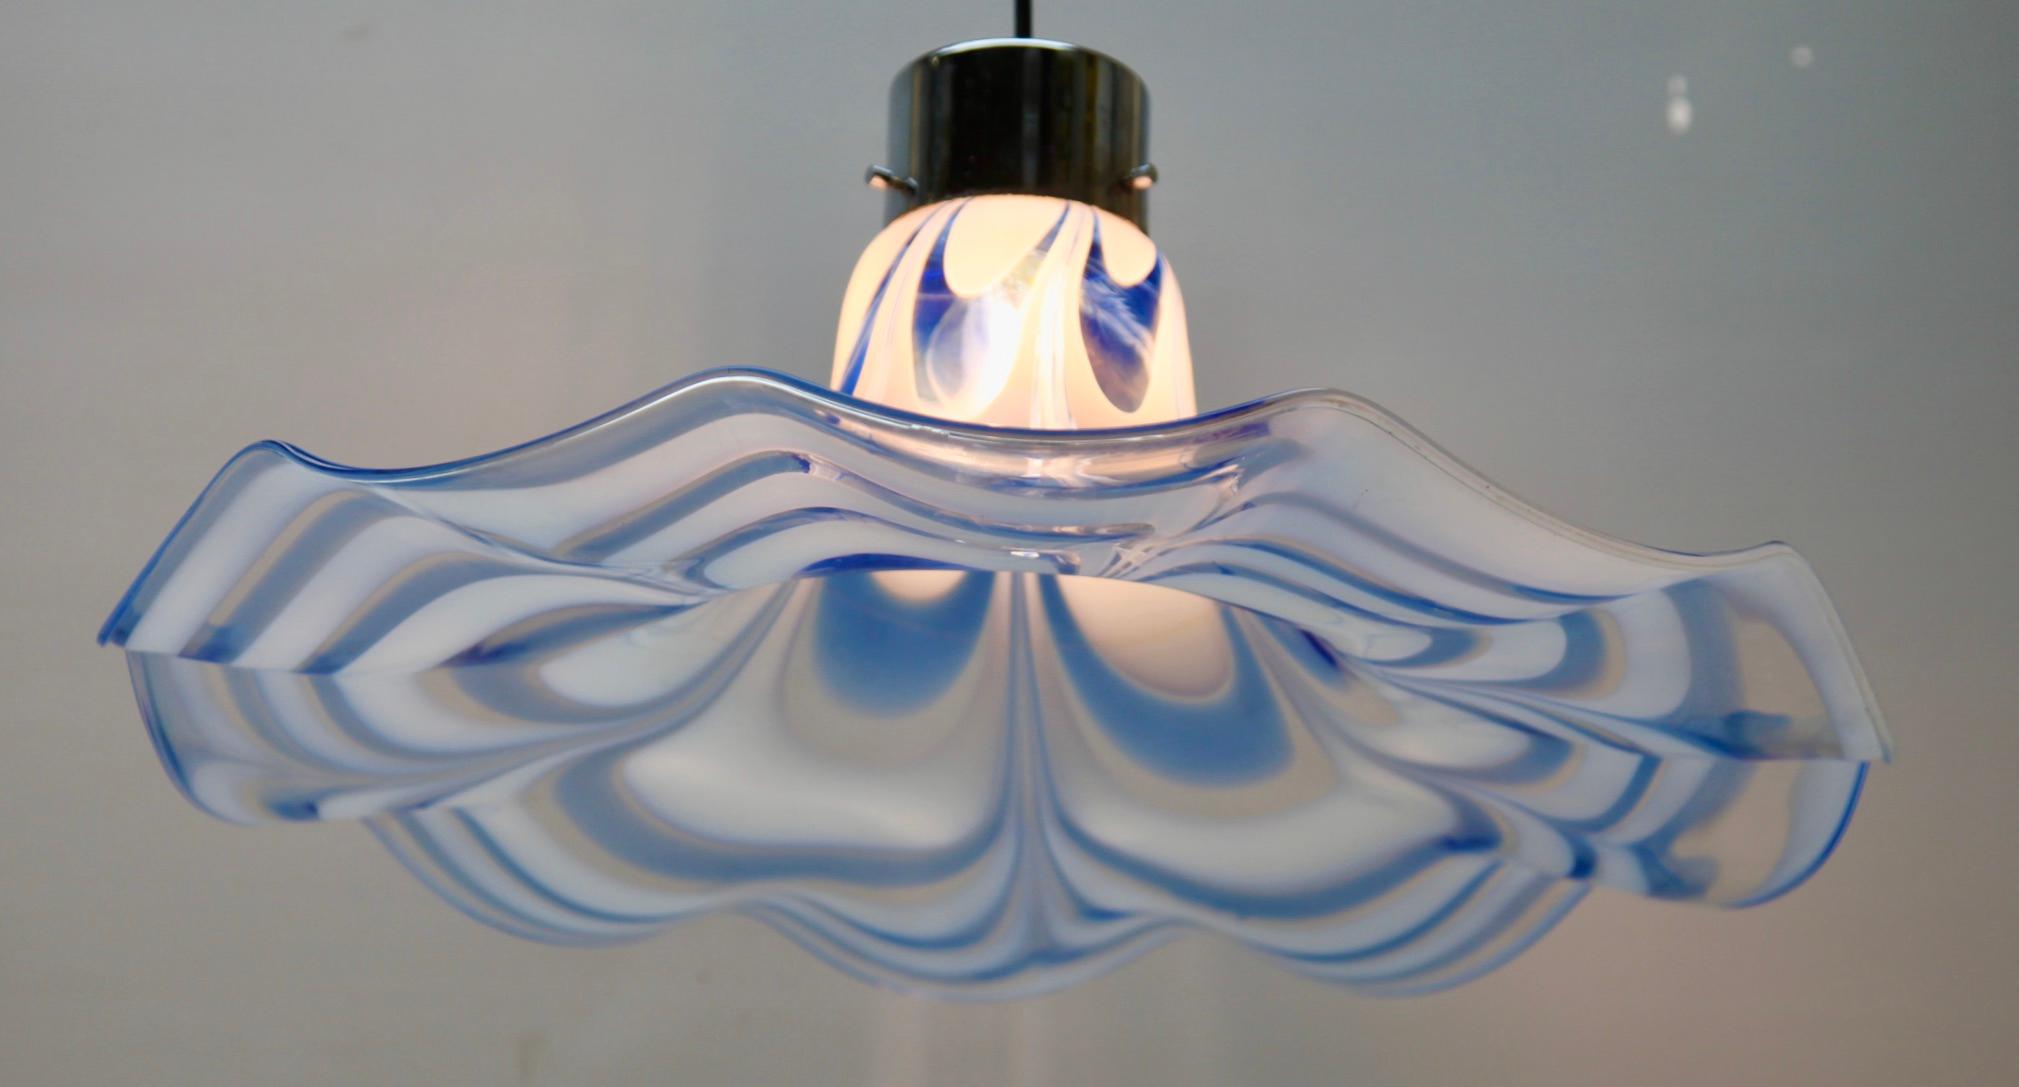 Hand-Crafted Mid-Century Modernist, Large Murano Pendant Lamp, Style of Carlo Nason 1960s